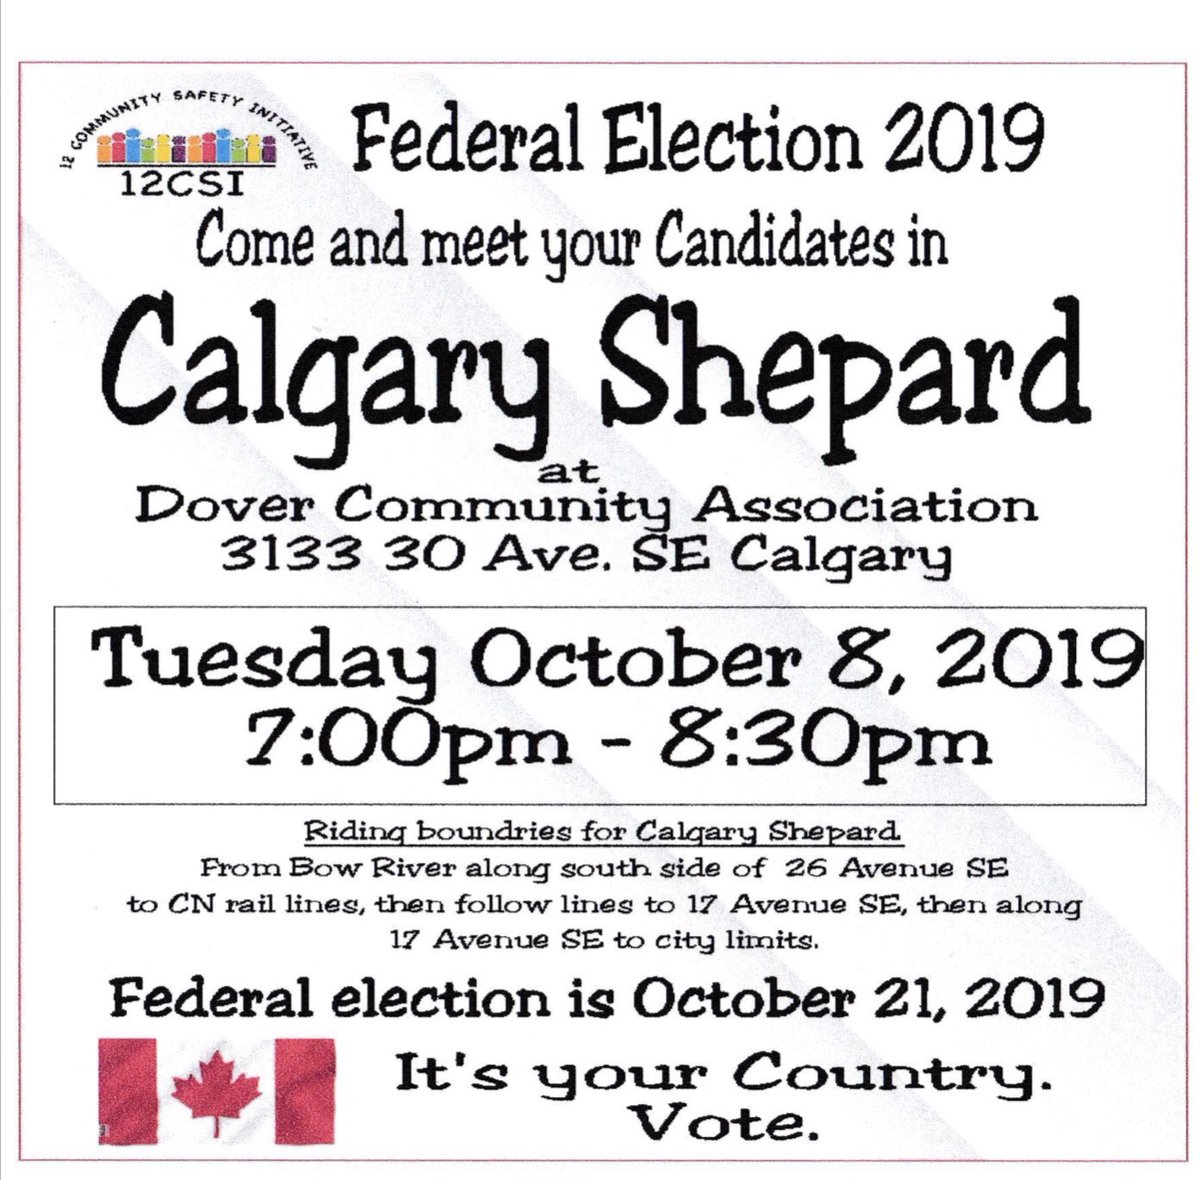 See you there on Tuesday. 
#BernierNation #2019Elections #ppc